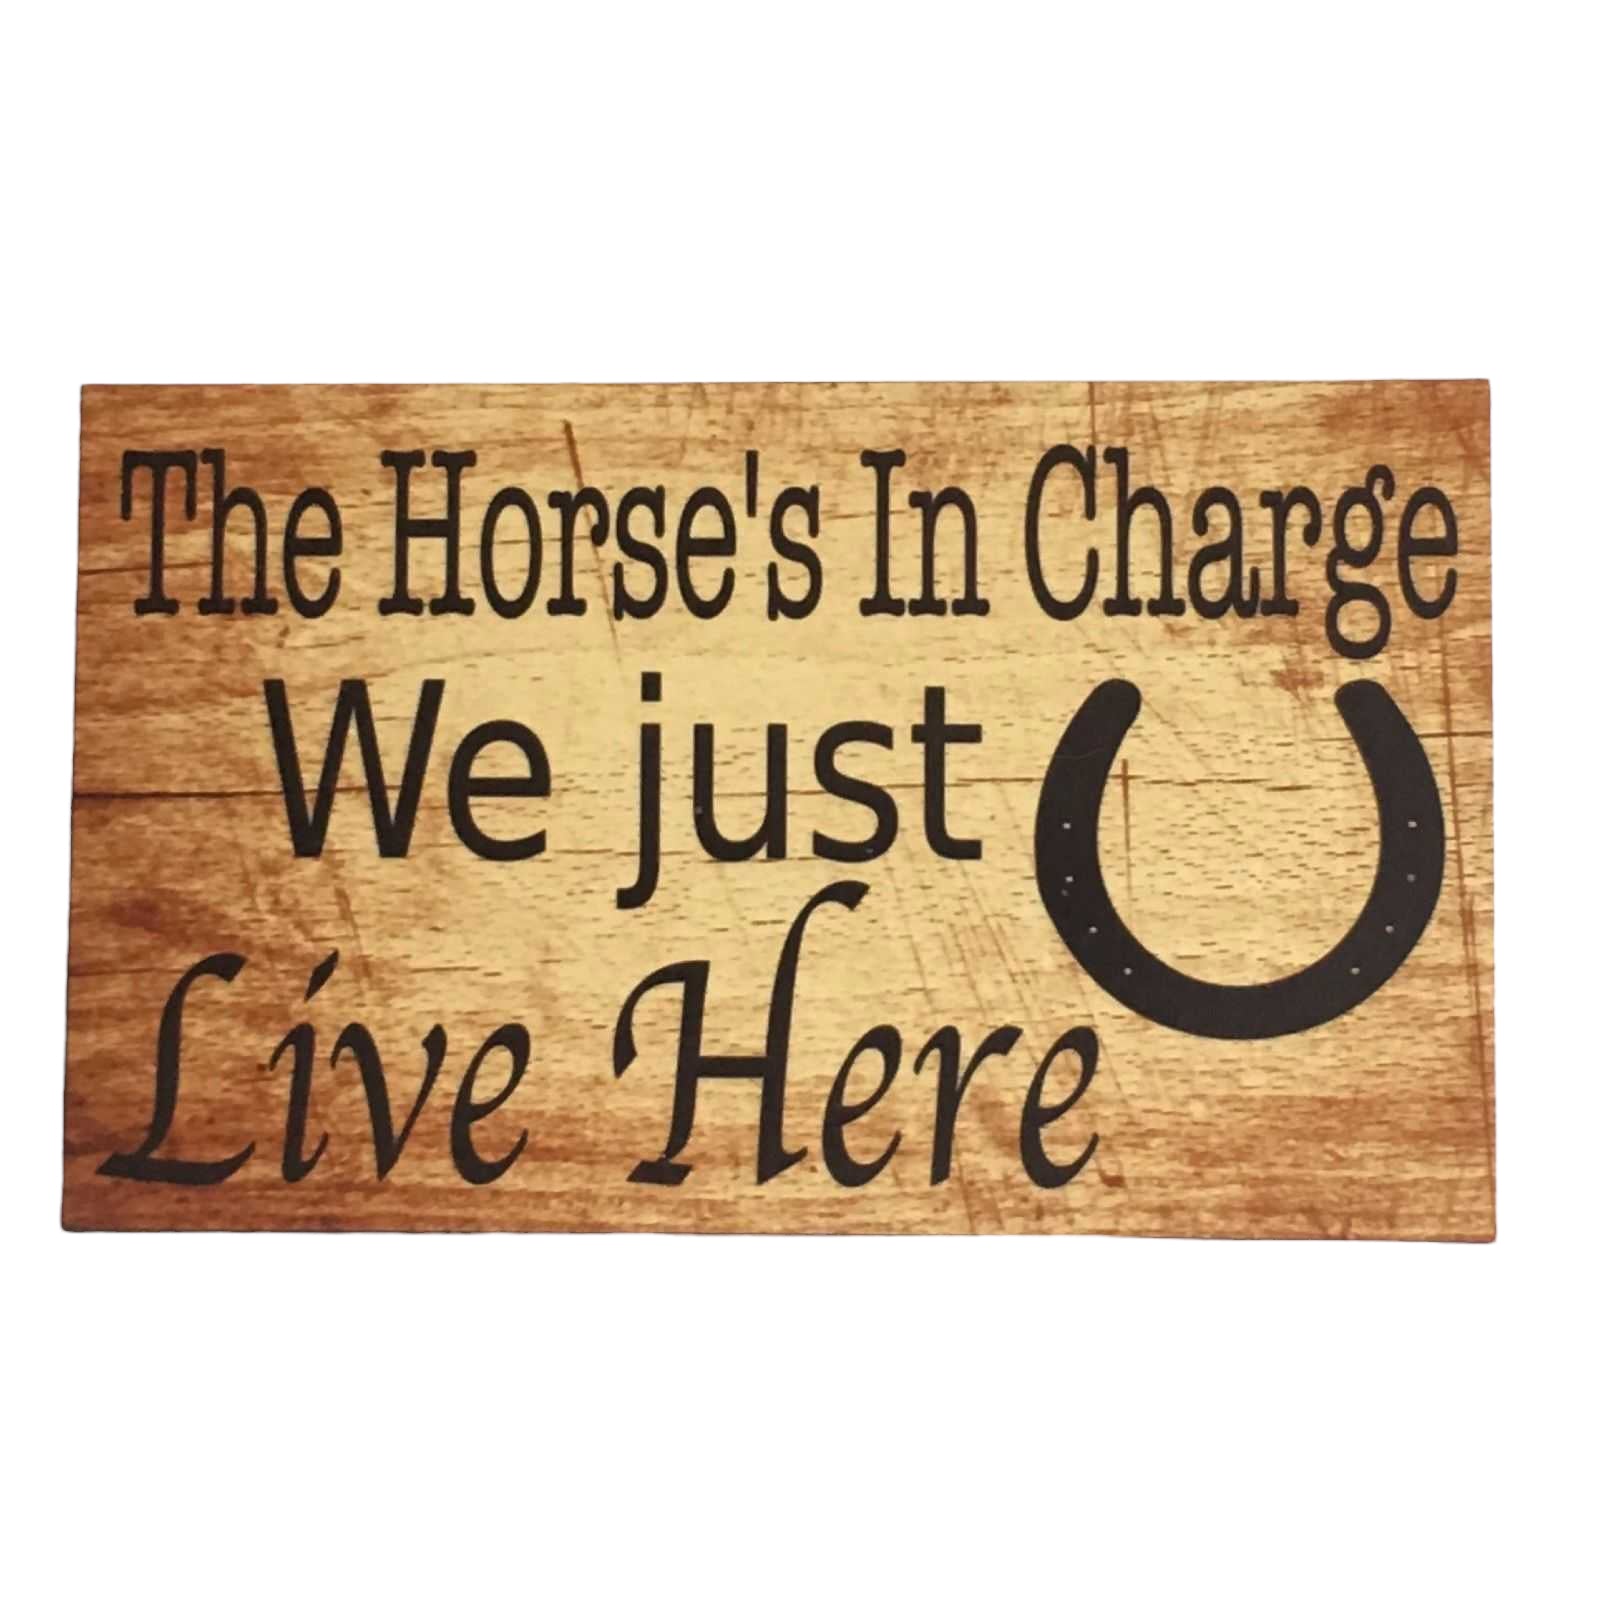 Horses In Charge We Just Live Here Horse Sign - The Renmy Store Homewares & Gifts 